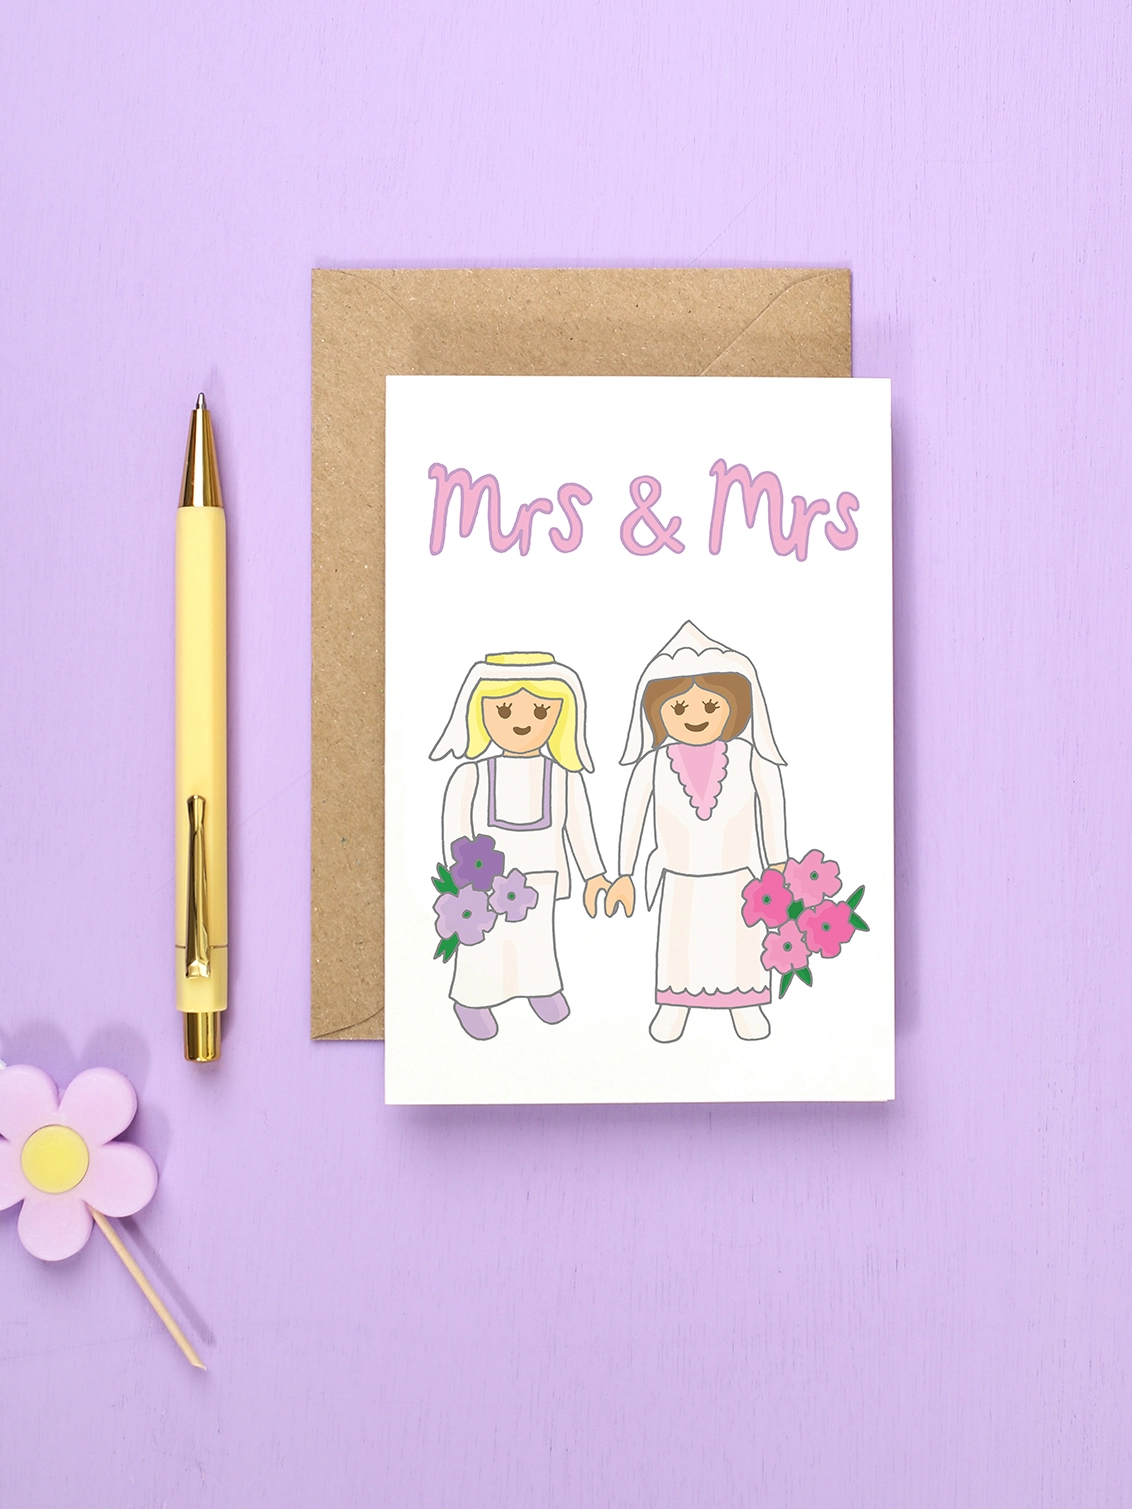 Mrs and Mrs wedding card